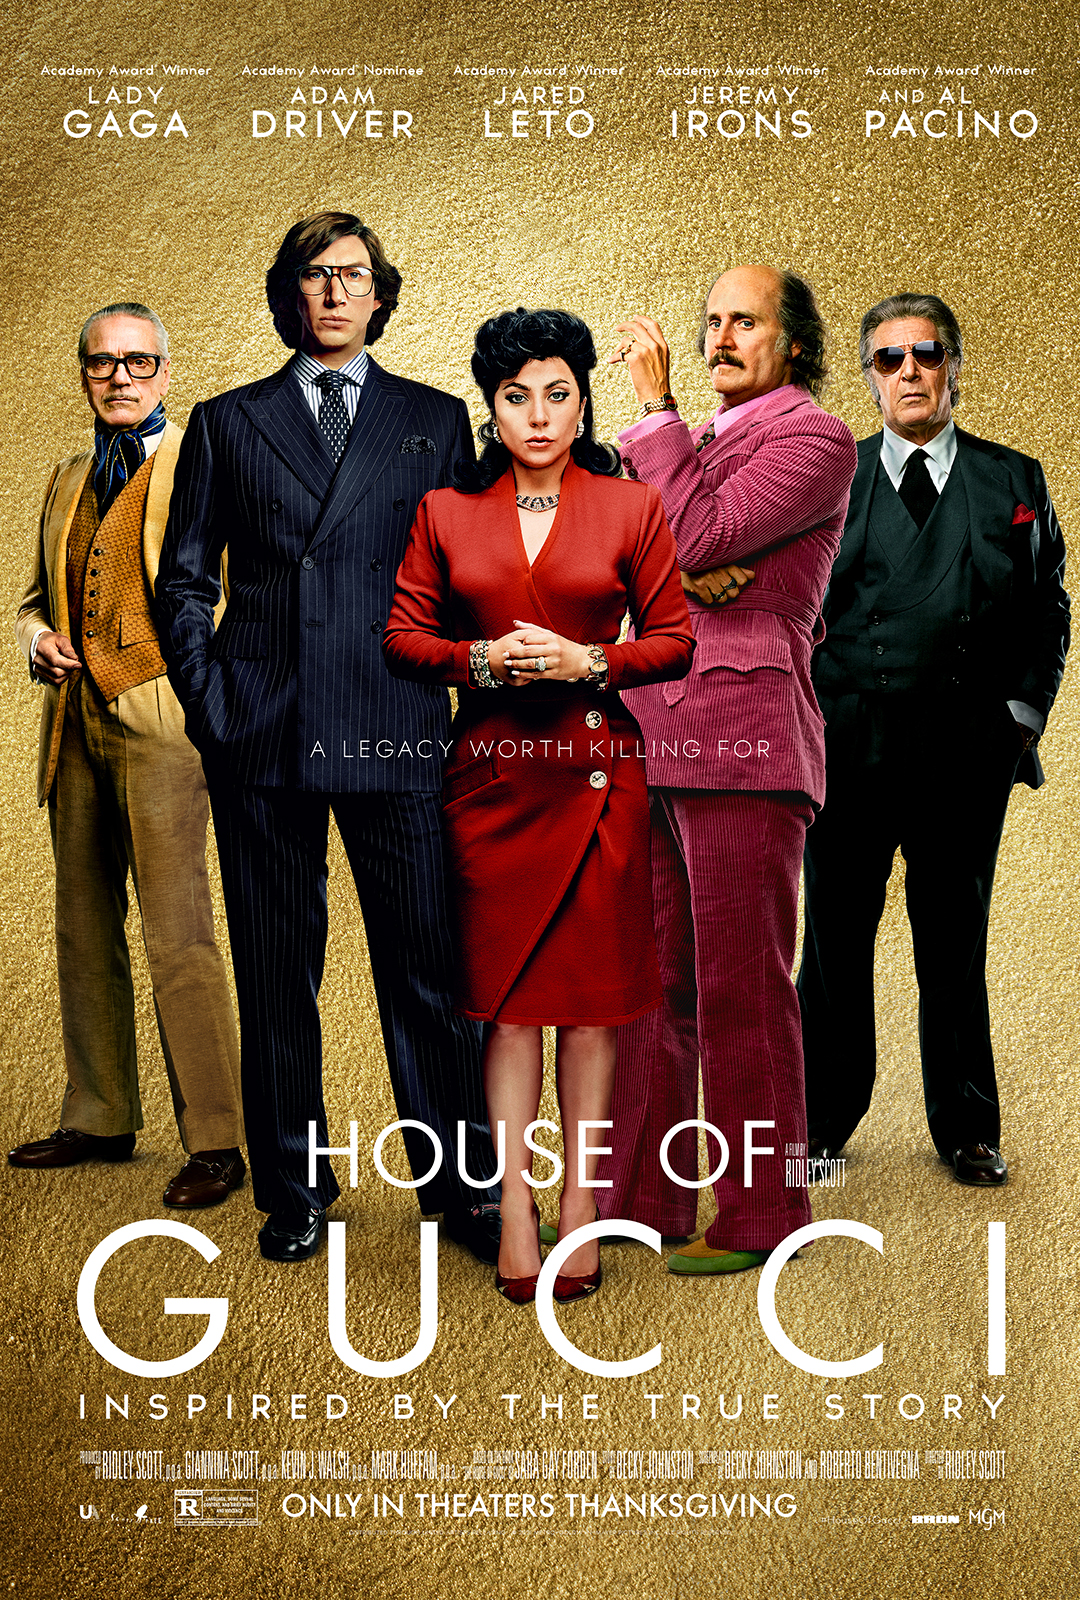 Image of the movie poster featuring 4 men and one woman of varied ages dressed in fashionable outfits. 